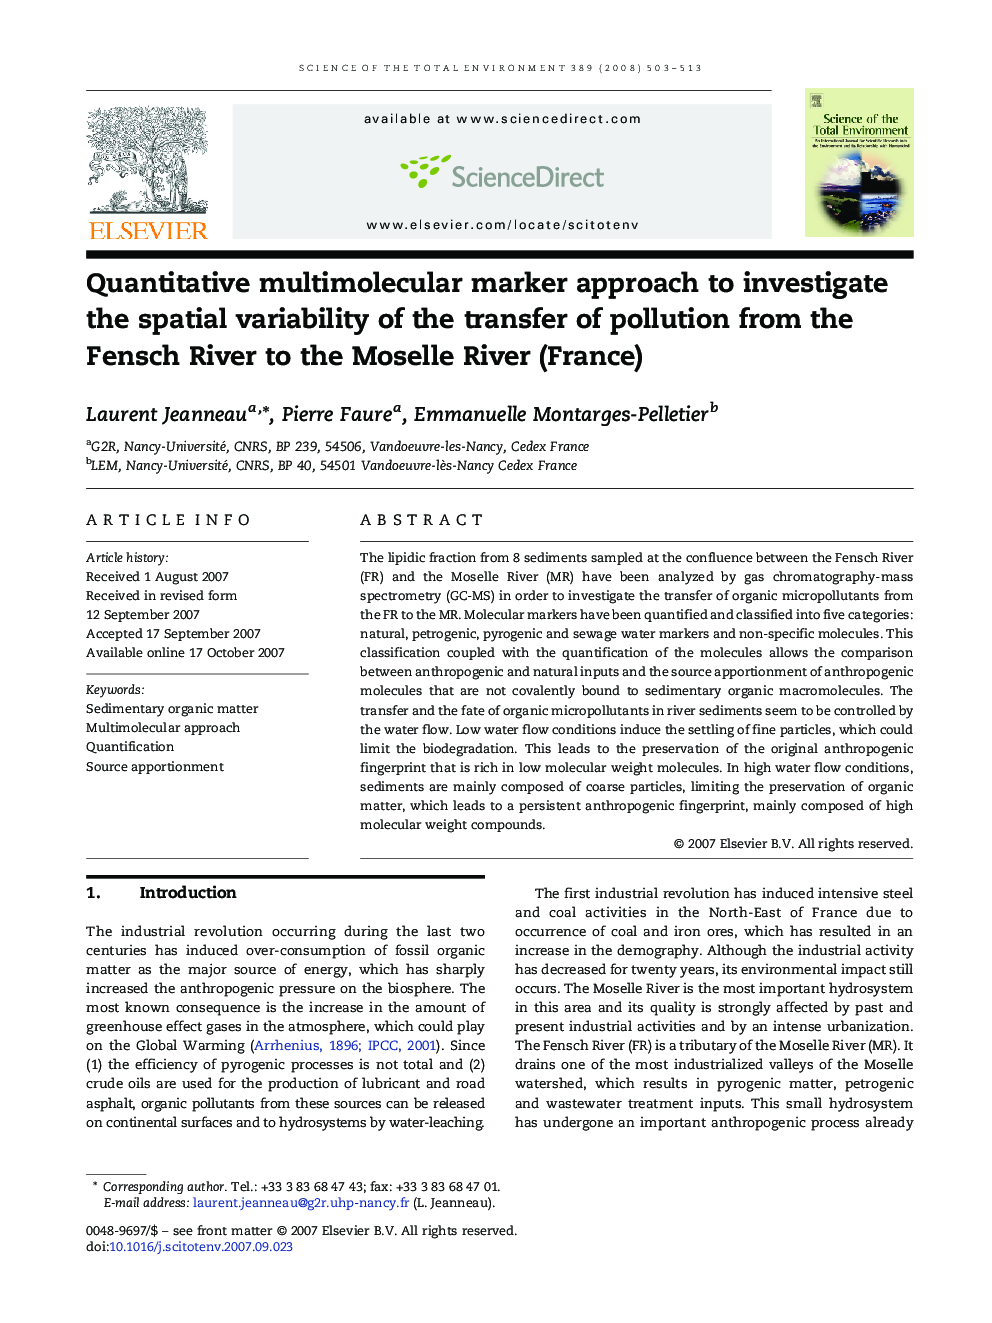 Quantitative multimolecular marker approach to investigate the spatial variability of the transfer of pollution from the Fensch River to the Moselle River (France)